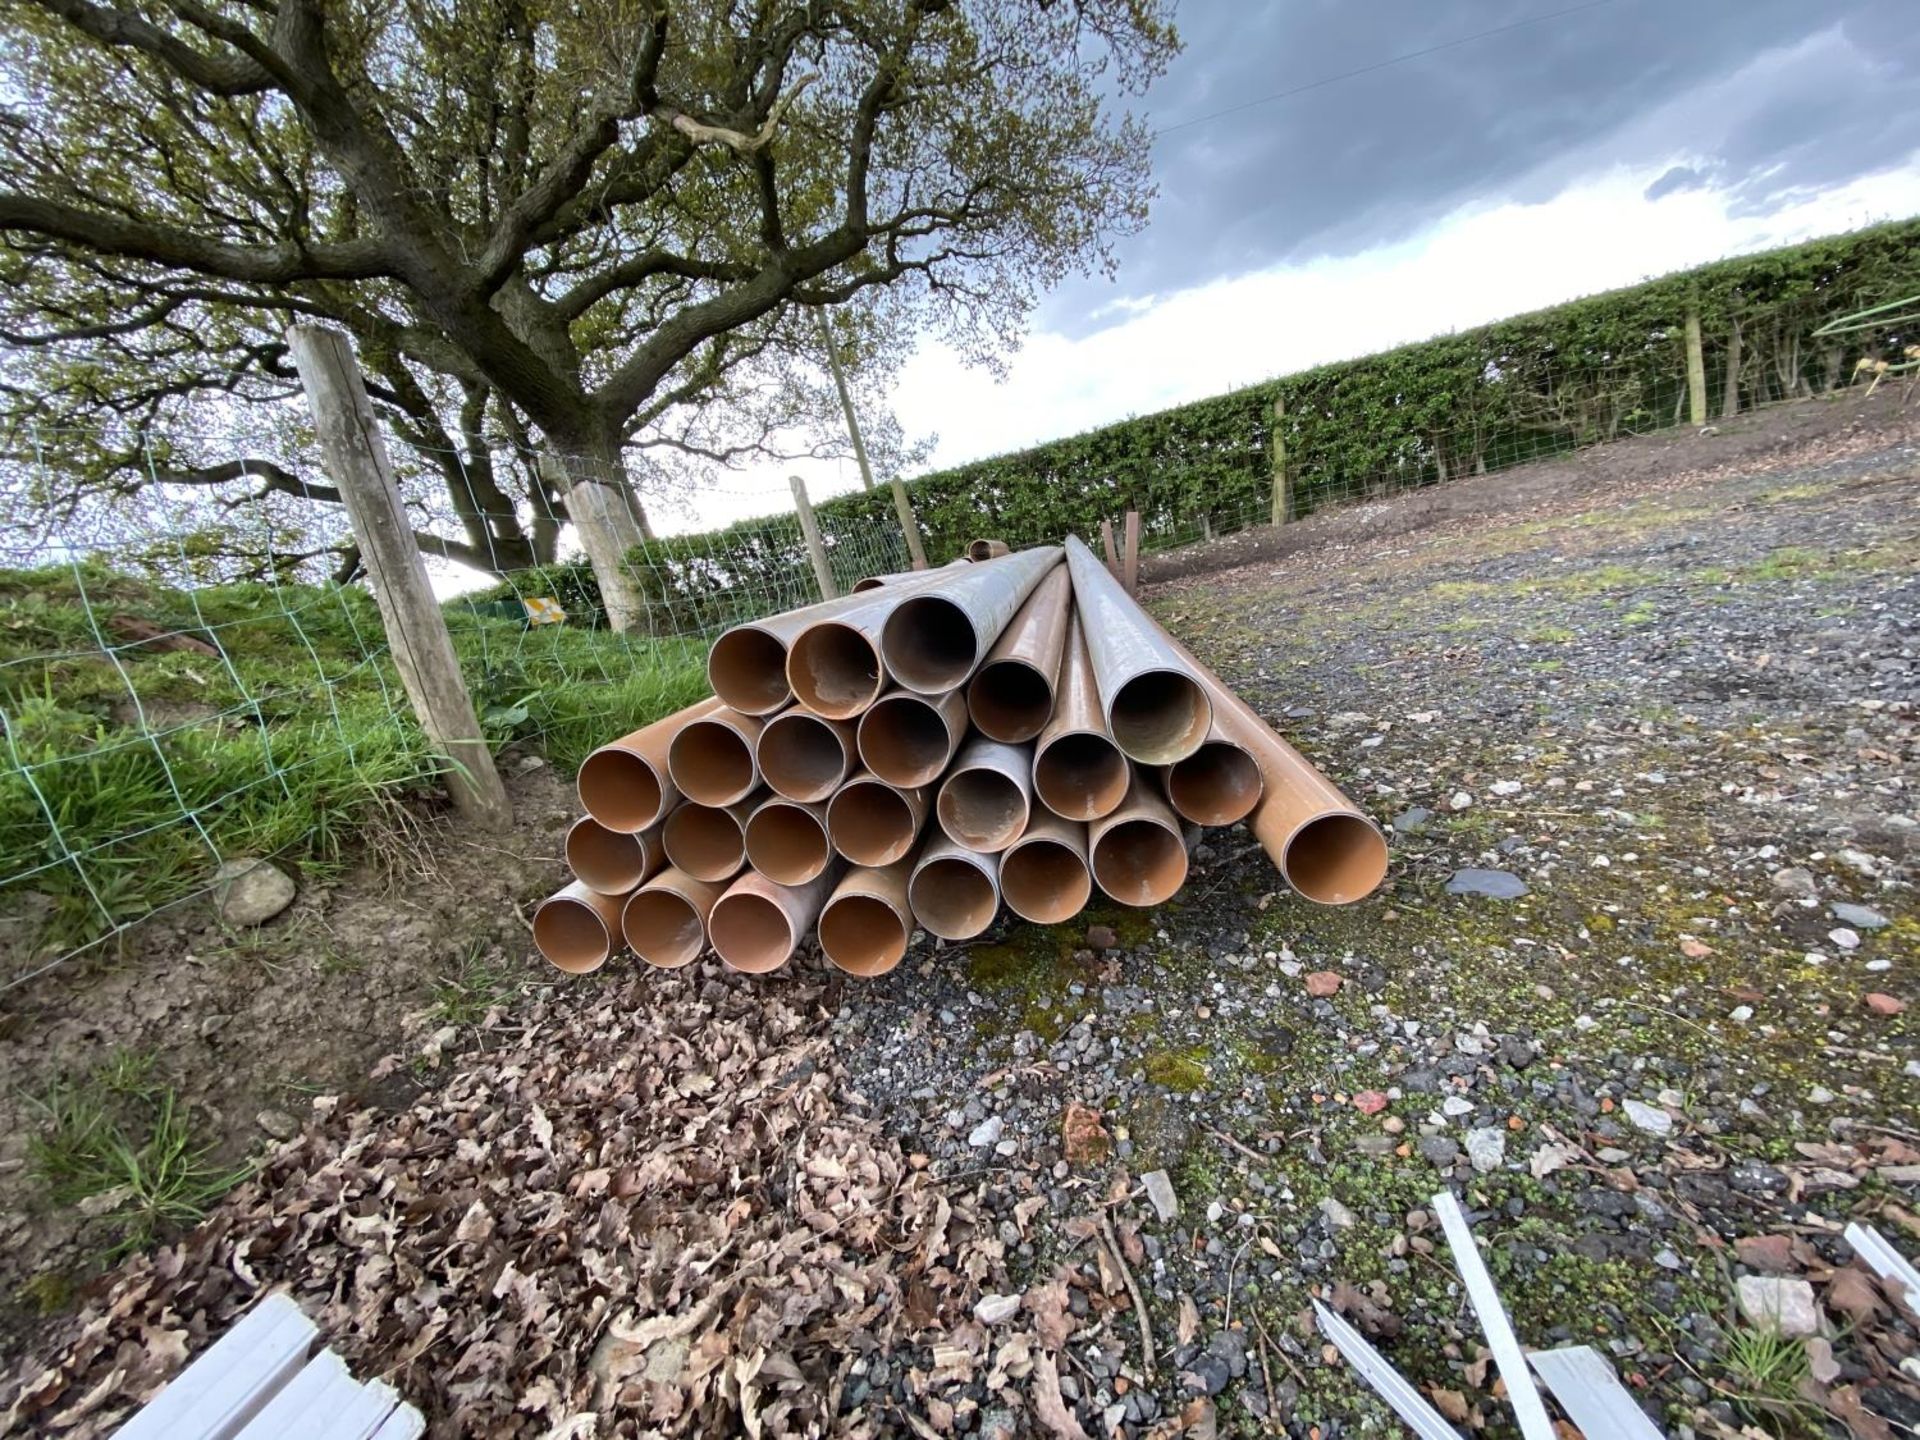 24 X 4" SOIL PIPES 19'8" LONG + STILLAGE - Image 2 of 2